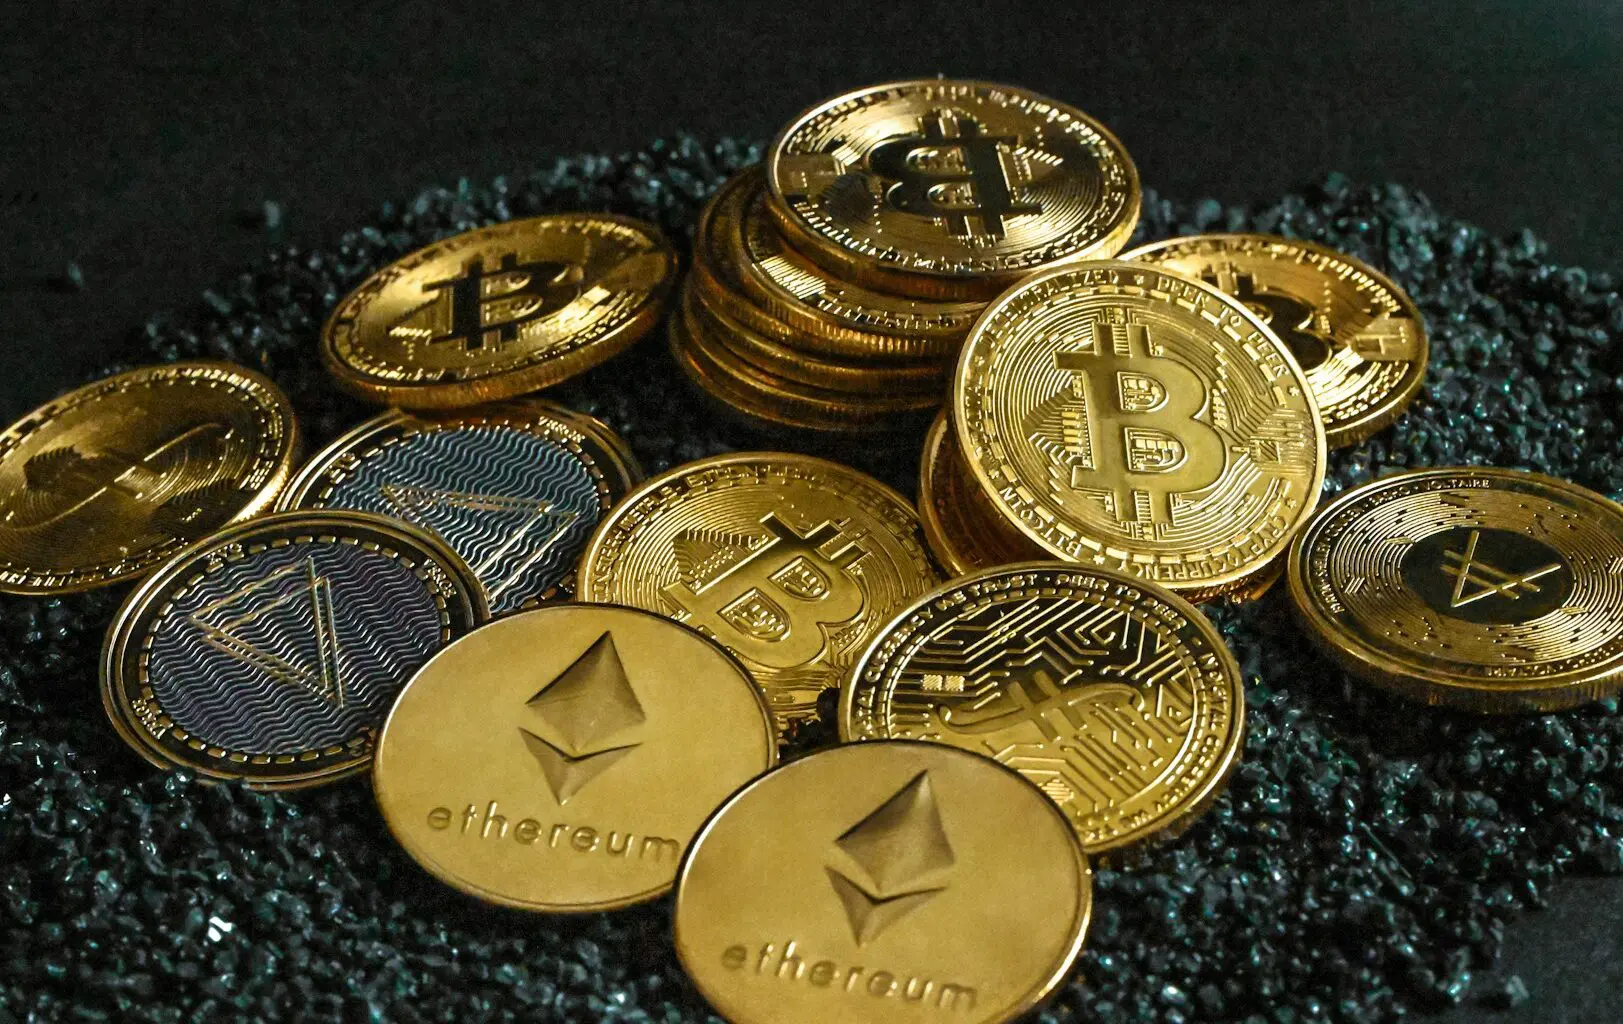 A pile of various cryptocurrency tokens, including gold and silver-colored coins.